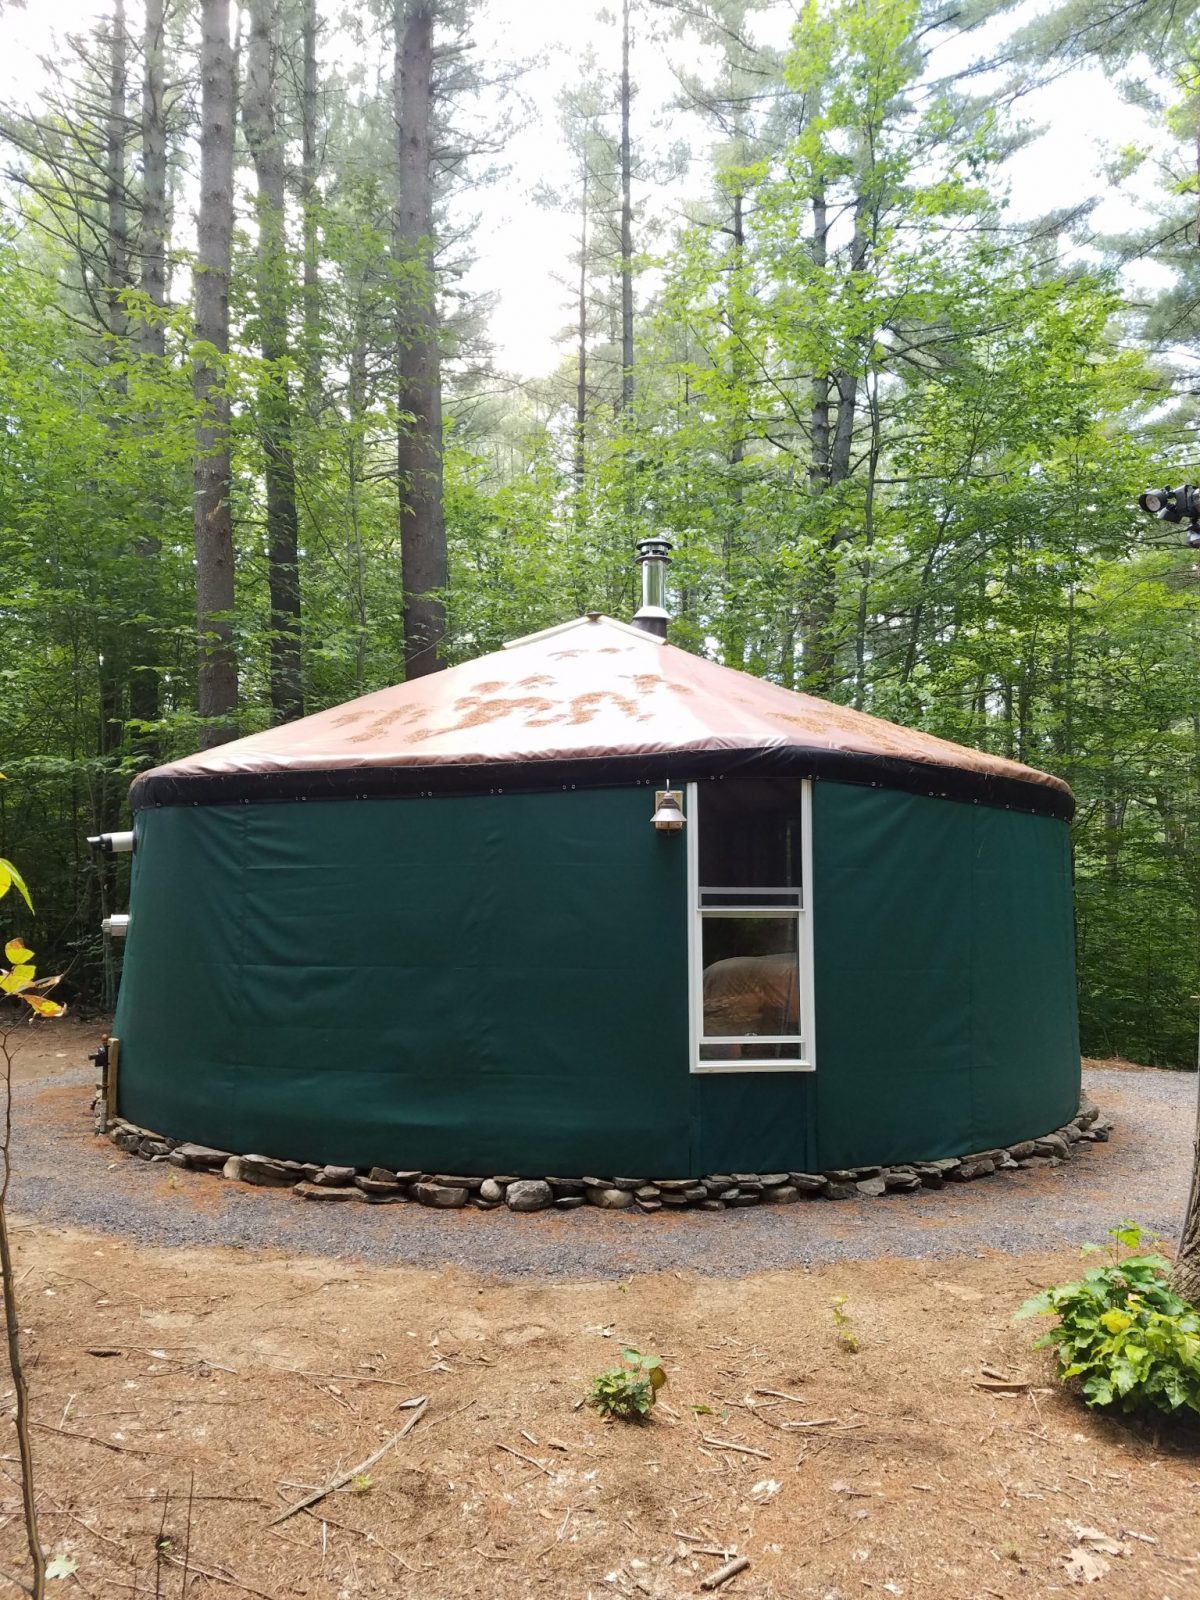 How Much Does a Yurt Cost?